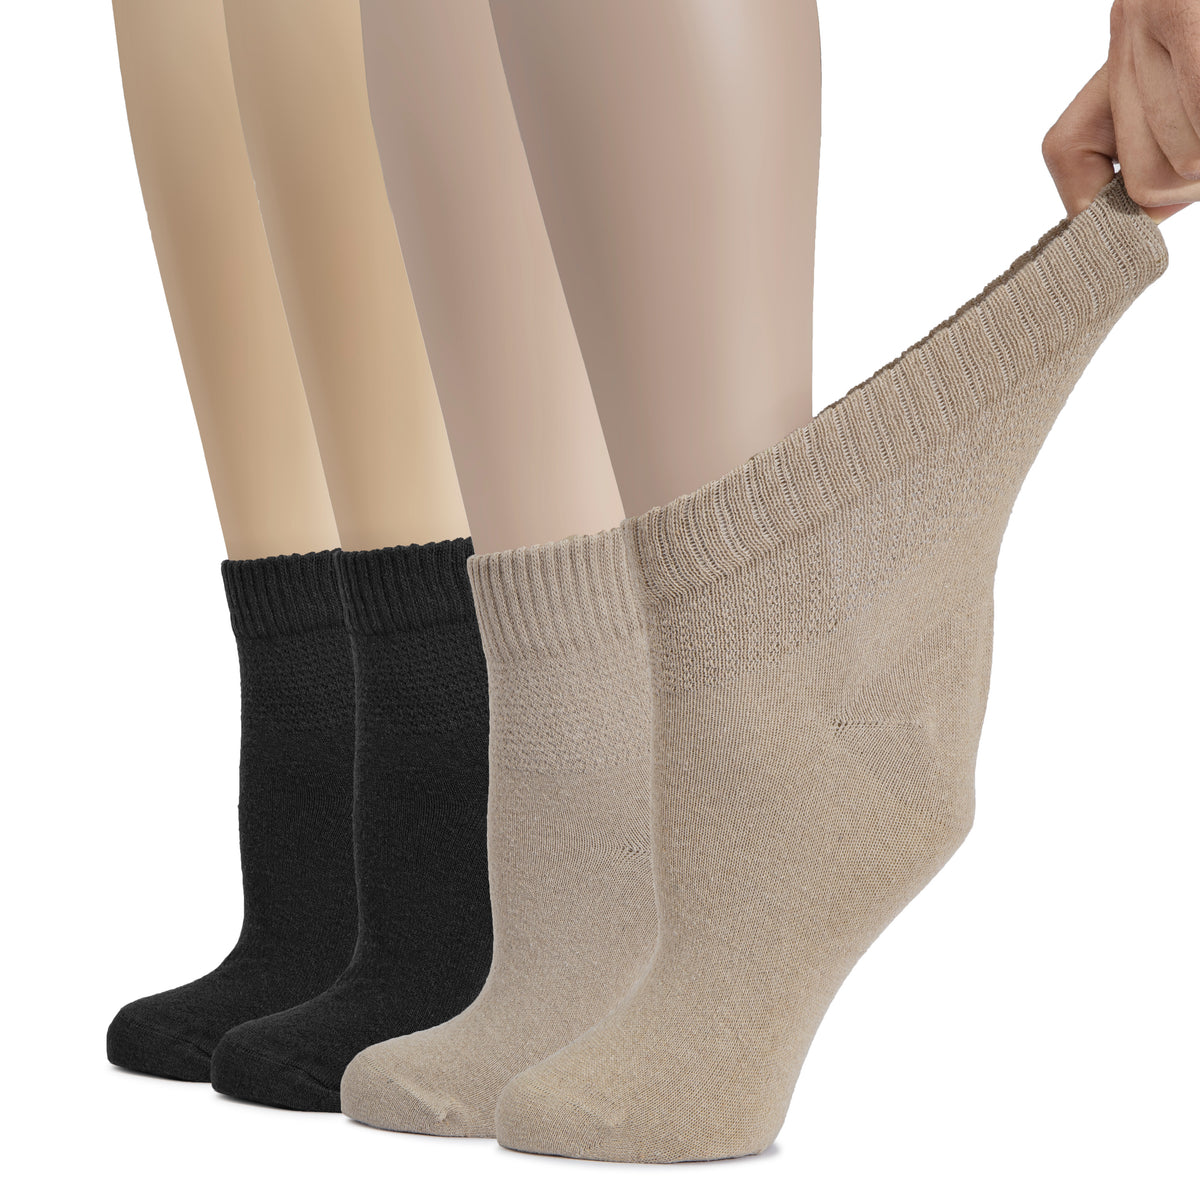 Hugh Ugoli Cotton Diabetic Women's Socks, Ankle Height, Loose, Wide Stretchy, Thin, Seamless Toe and Non-Binding Top, 4 Pairs | Shoe Size: 6-9 | Black / MelangeGrey